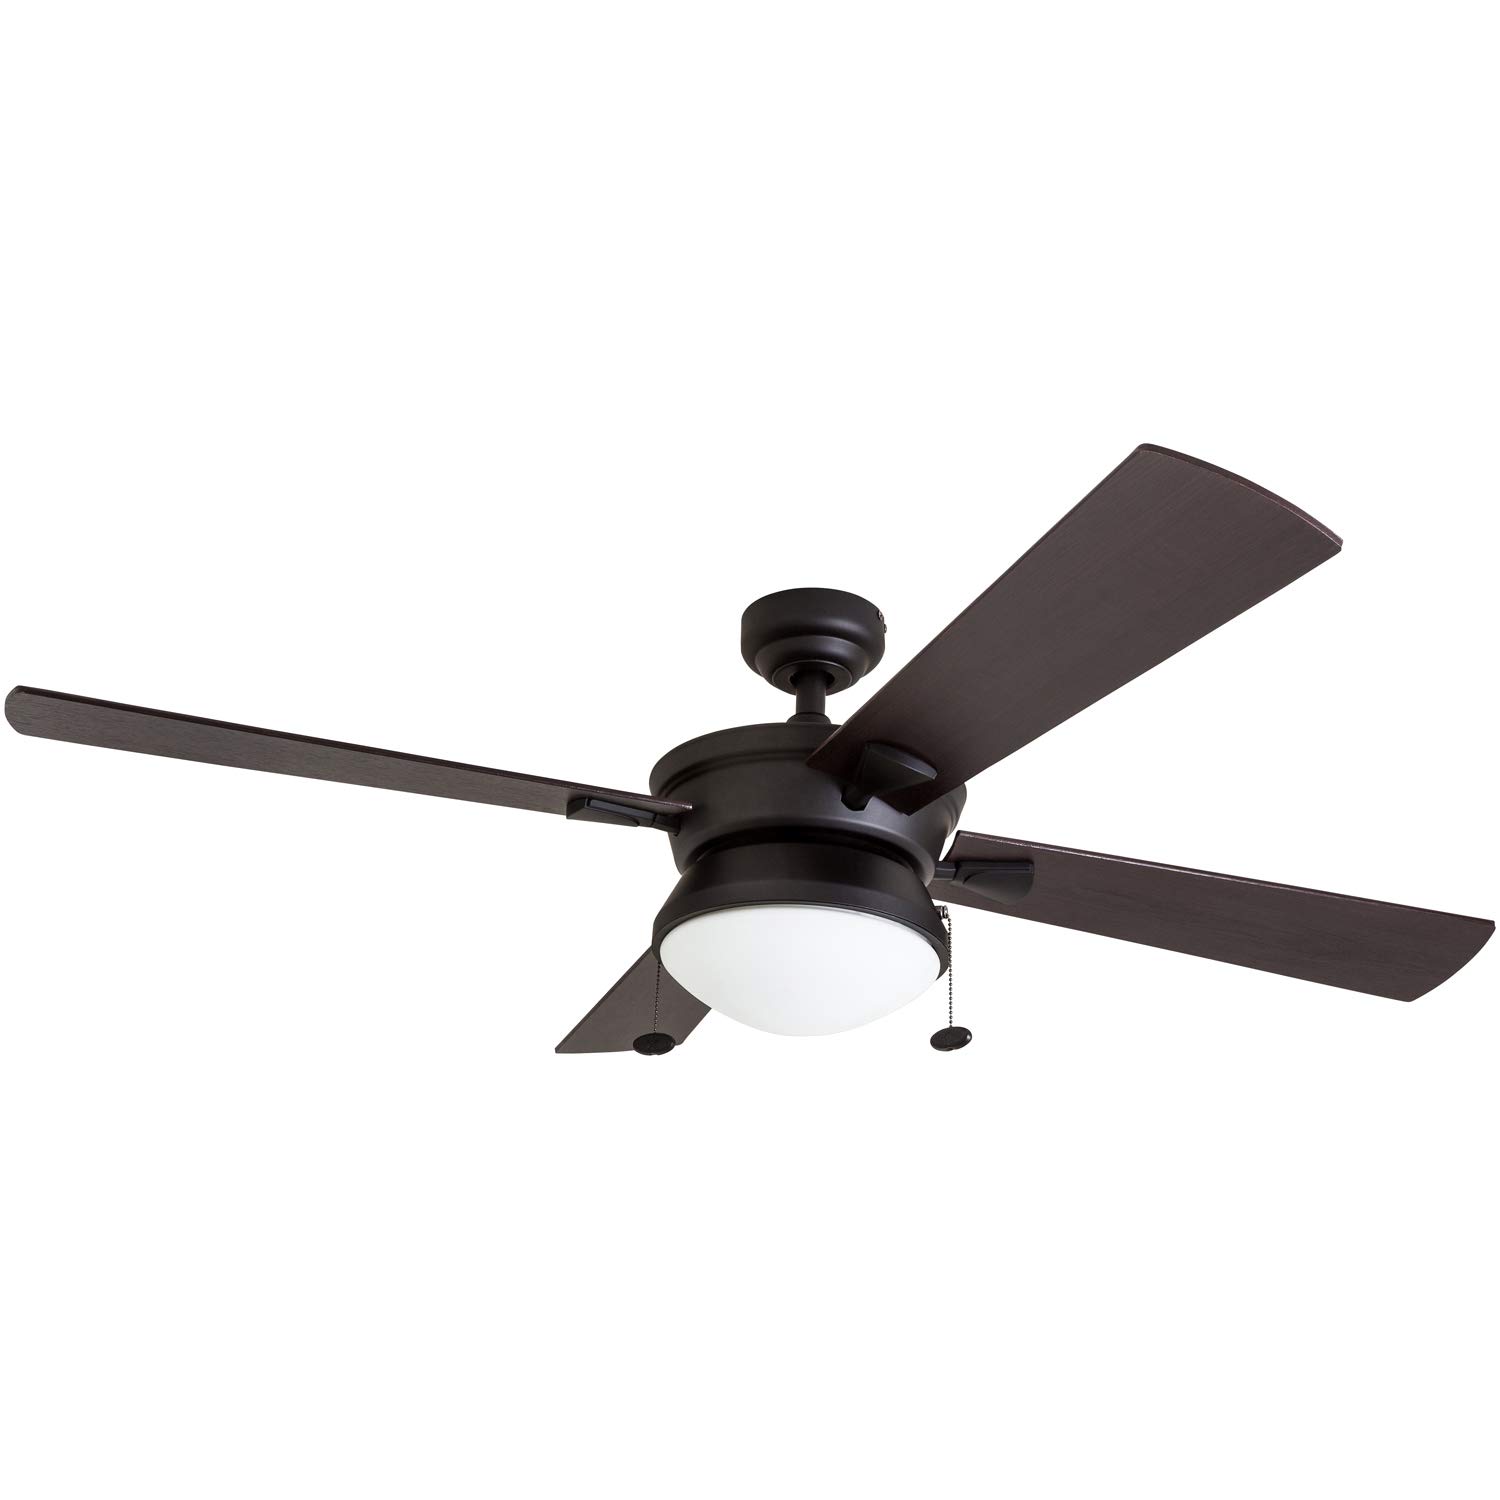 Prominence Home Auletta Ceiling Fan